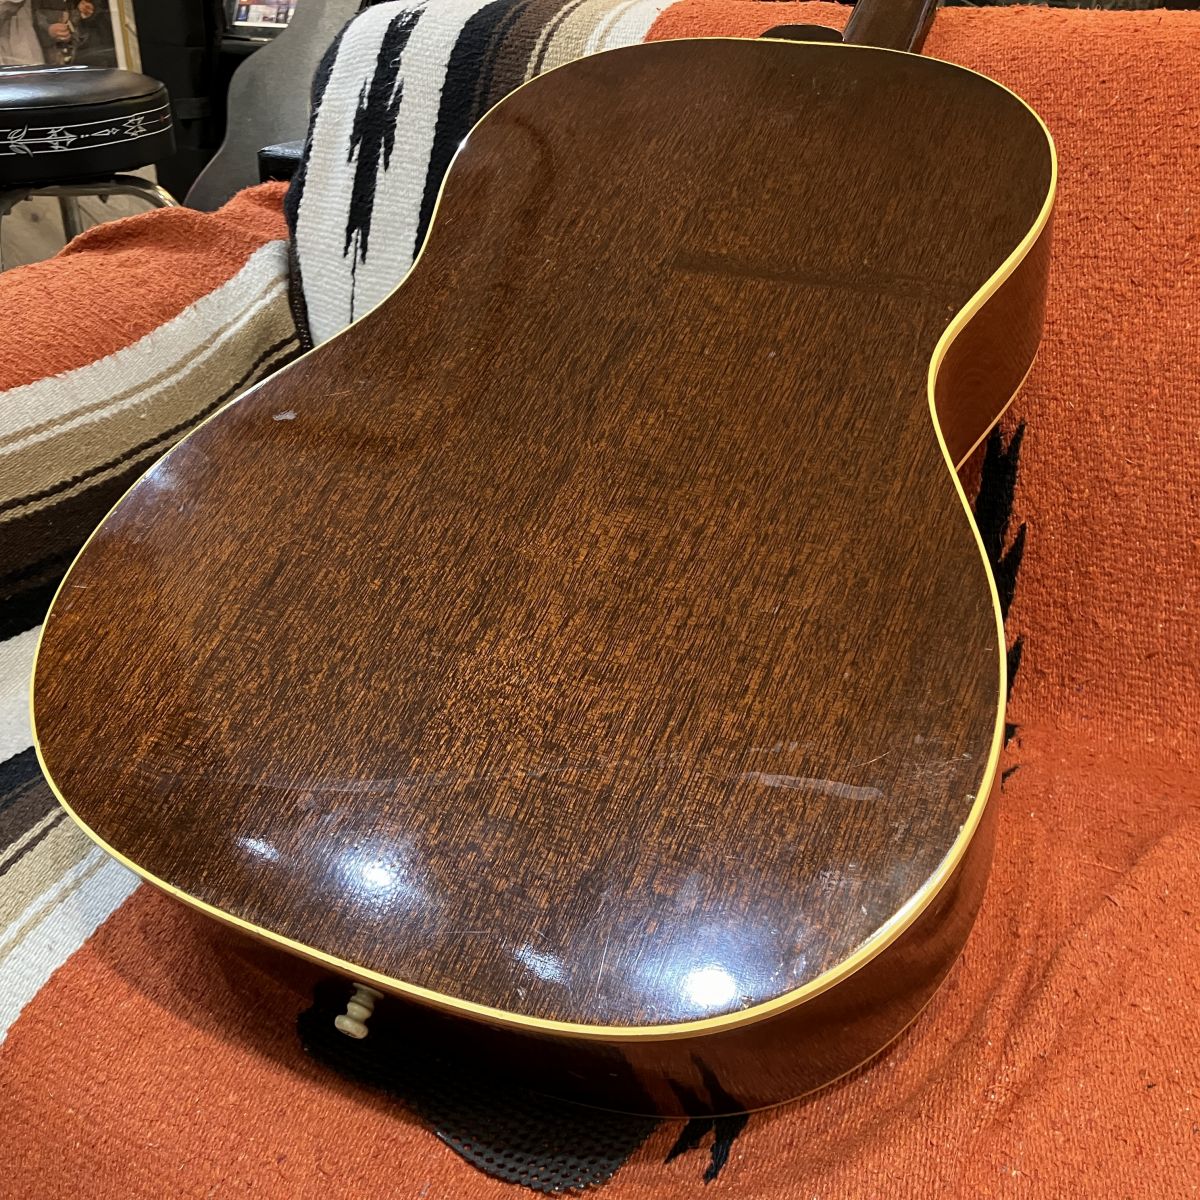 [SN 099828] USED Gibson / 1967 B-25 Natural [09]